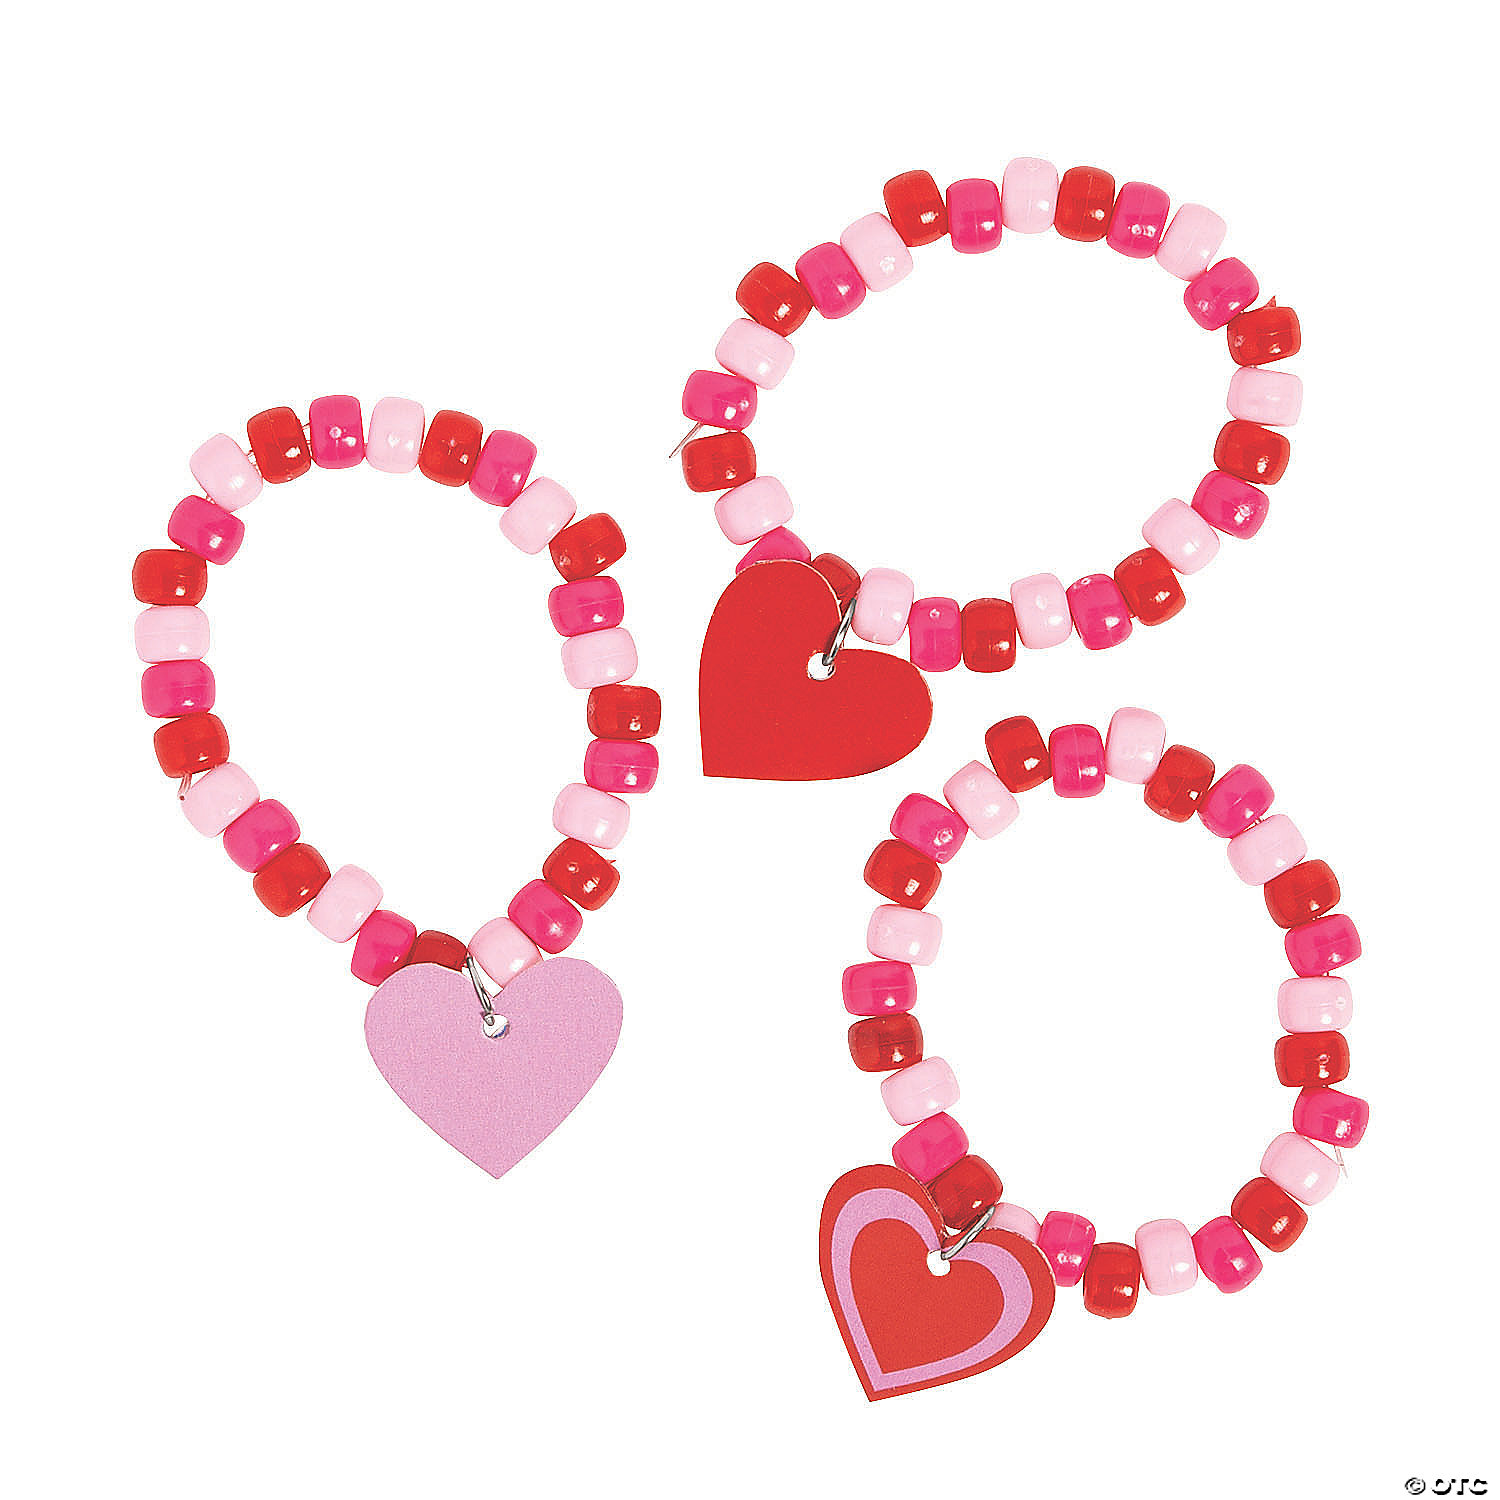 DIY Beaded Charm Bracelet Project for Valentine's Day – Golden Age Beads  Blog